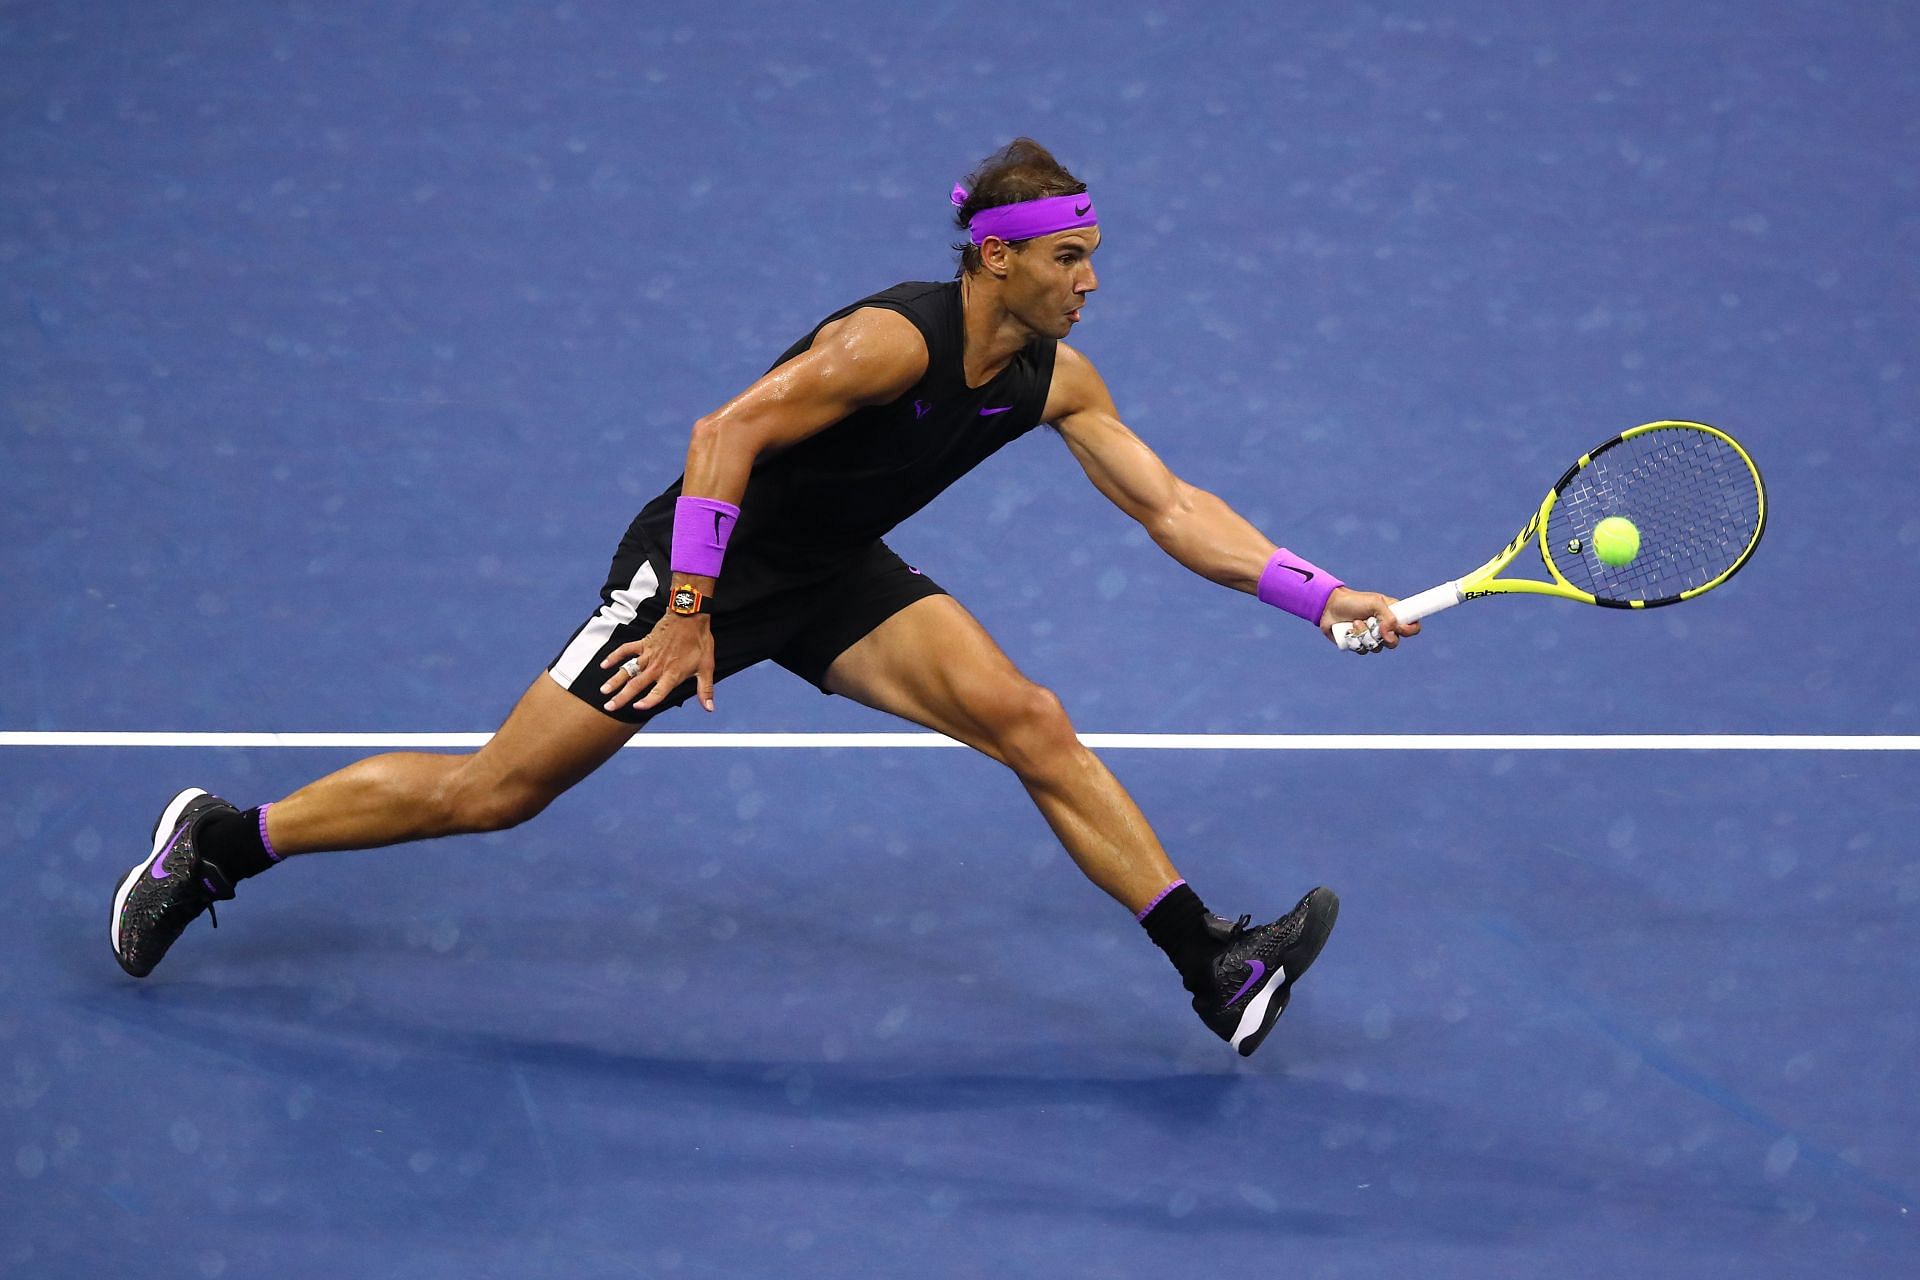 Rafael Nadal in action at the 2019 US Open.